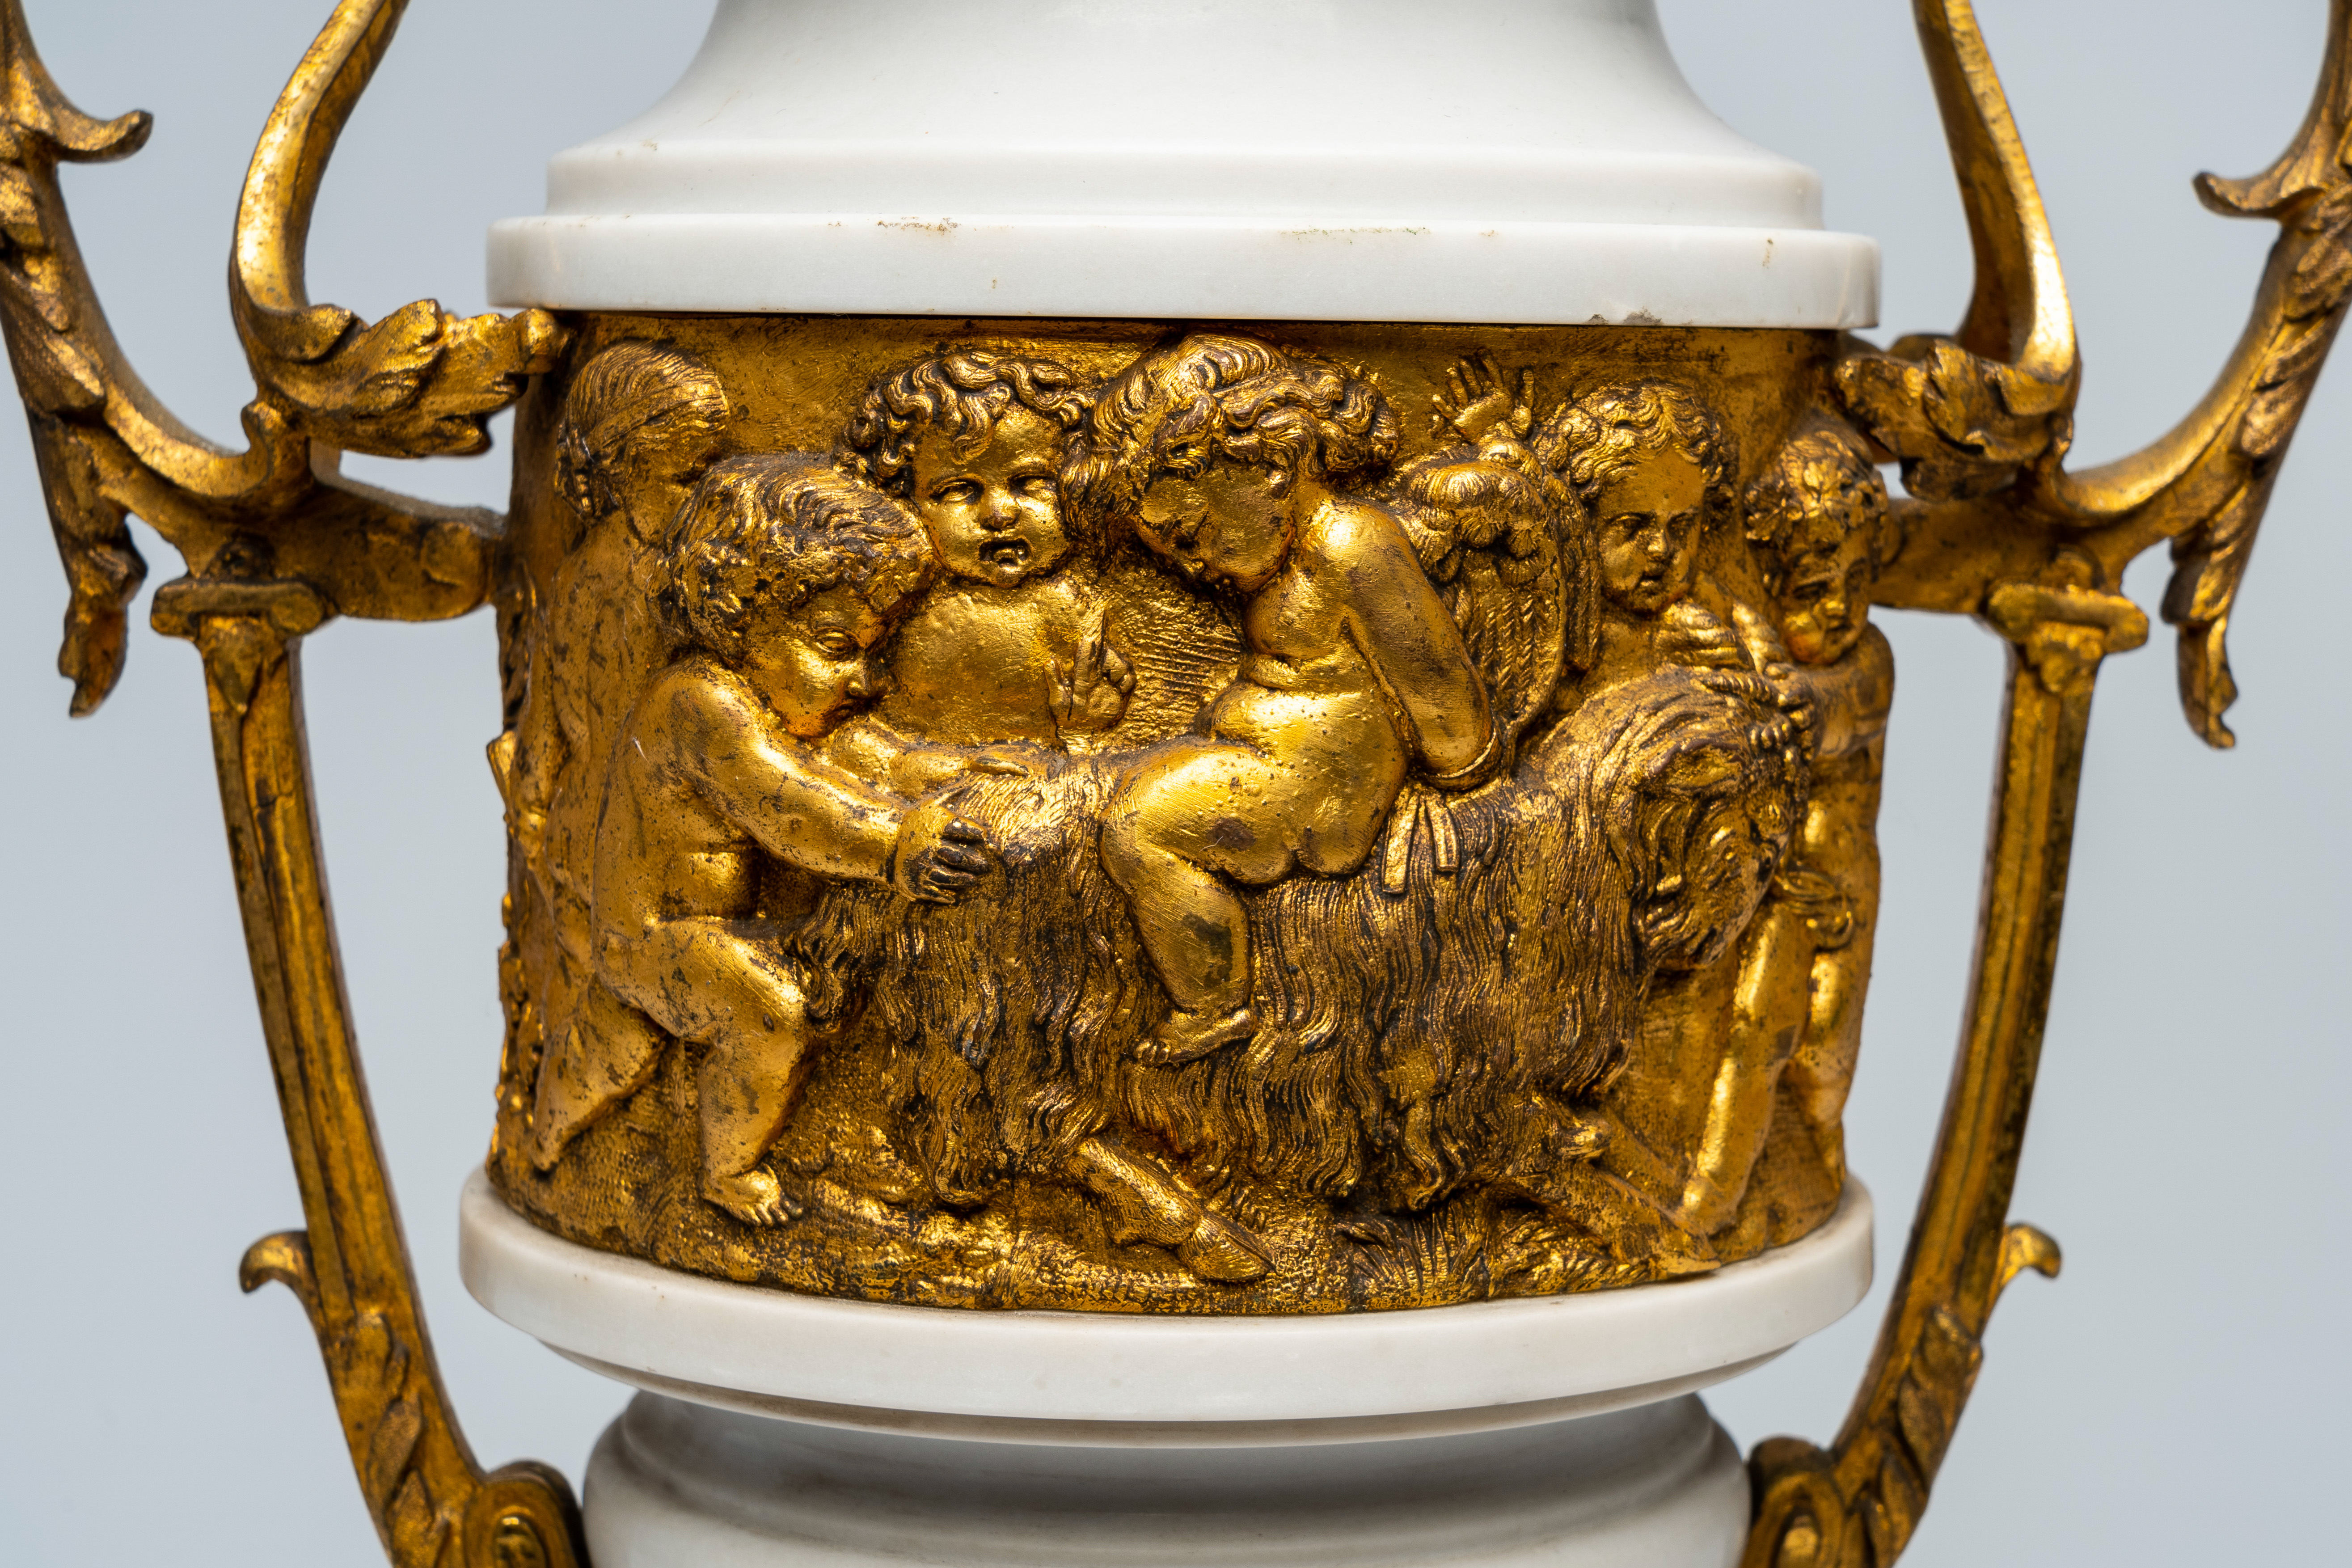 A pair of French gilt mounted white marble vases with relief design of putti, goats and Bacchus them - Image 7 of 7